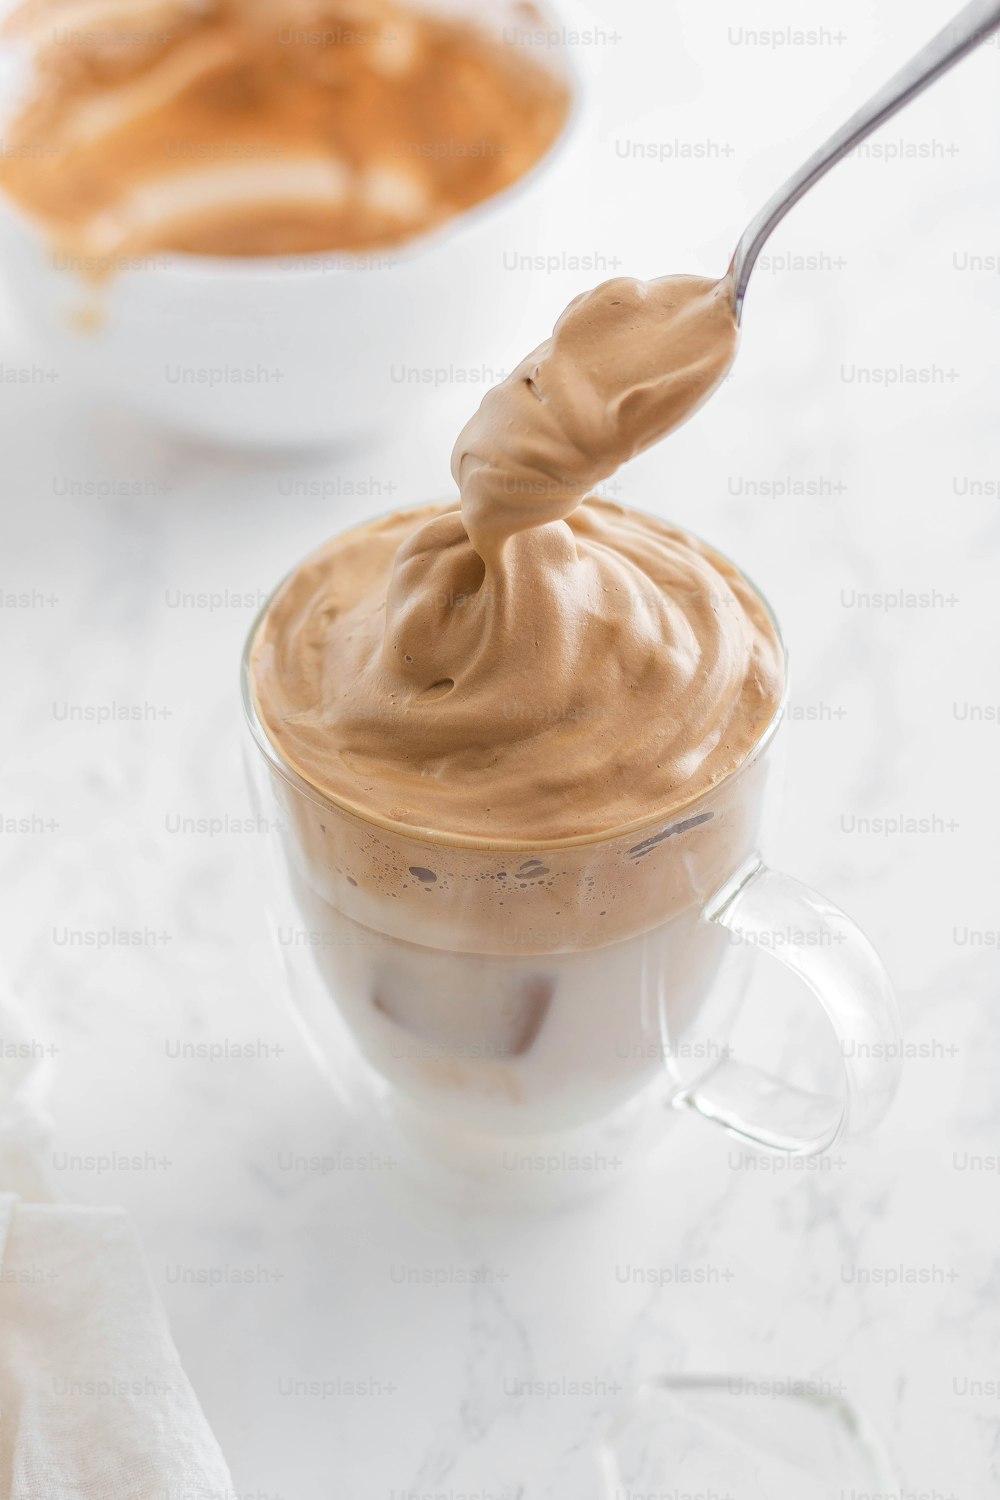 a spoon is in a cup of chocolate pudding